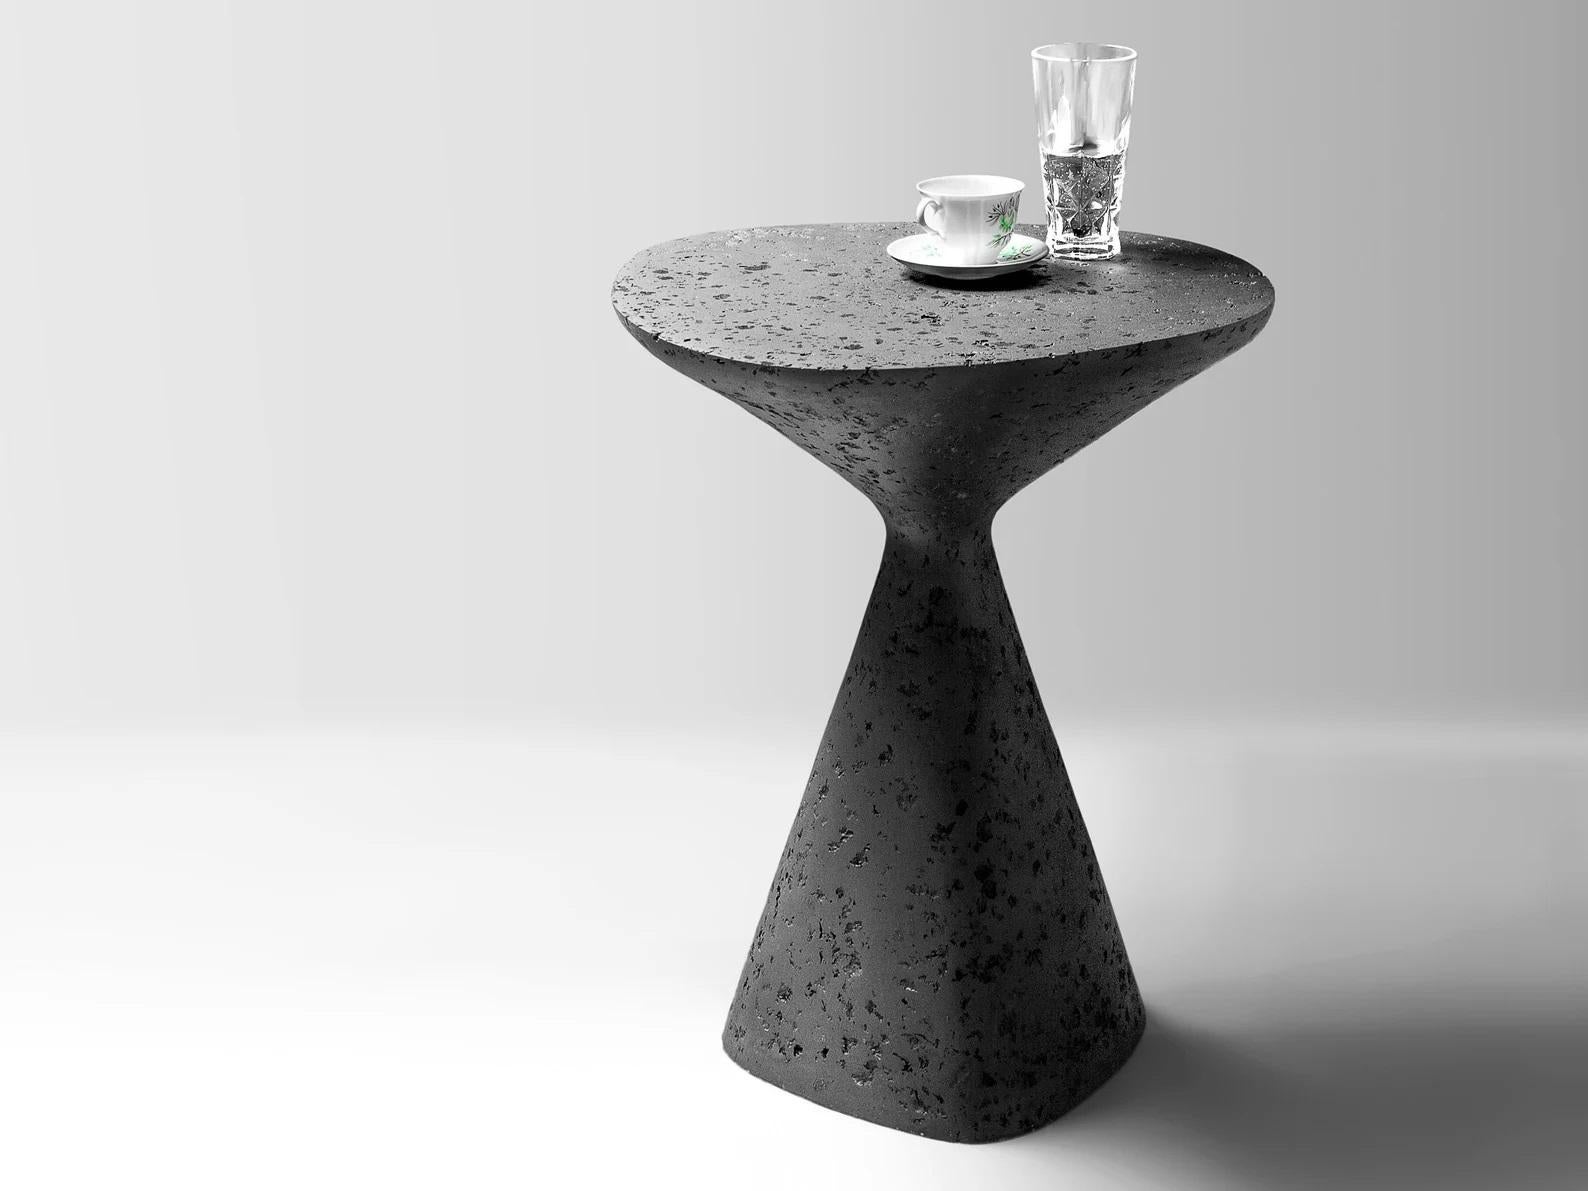 Black Mottled Side Table by Kasanai
Dimensions: D 46 x H 61 cm.
Materials: Cement, recycled paper, glue, paint.
6 kg.

The fusion of sturdiness and elegance, along with the blend of archaism and modernity. More than just a surface for placing